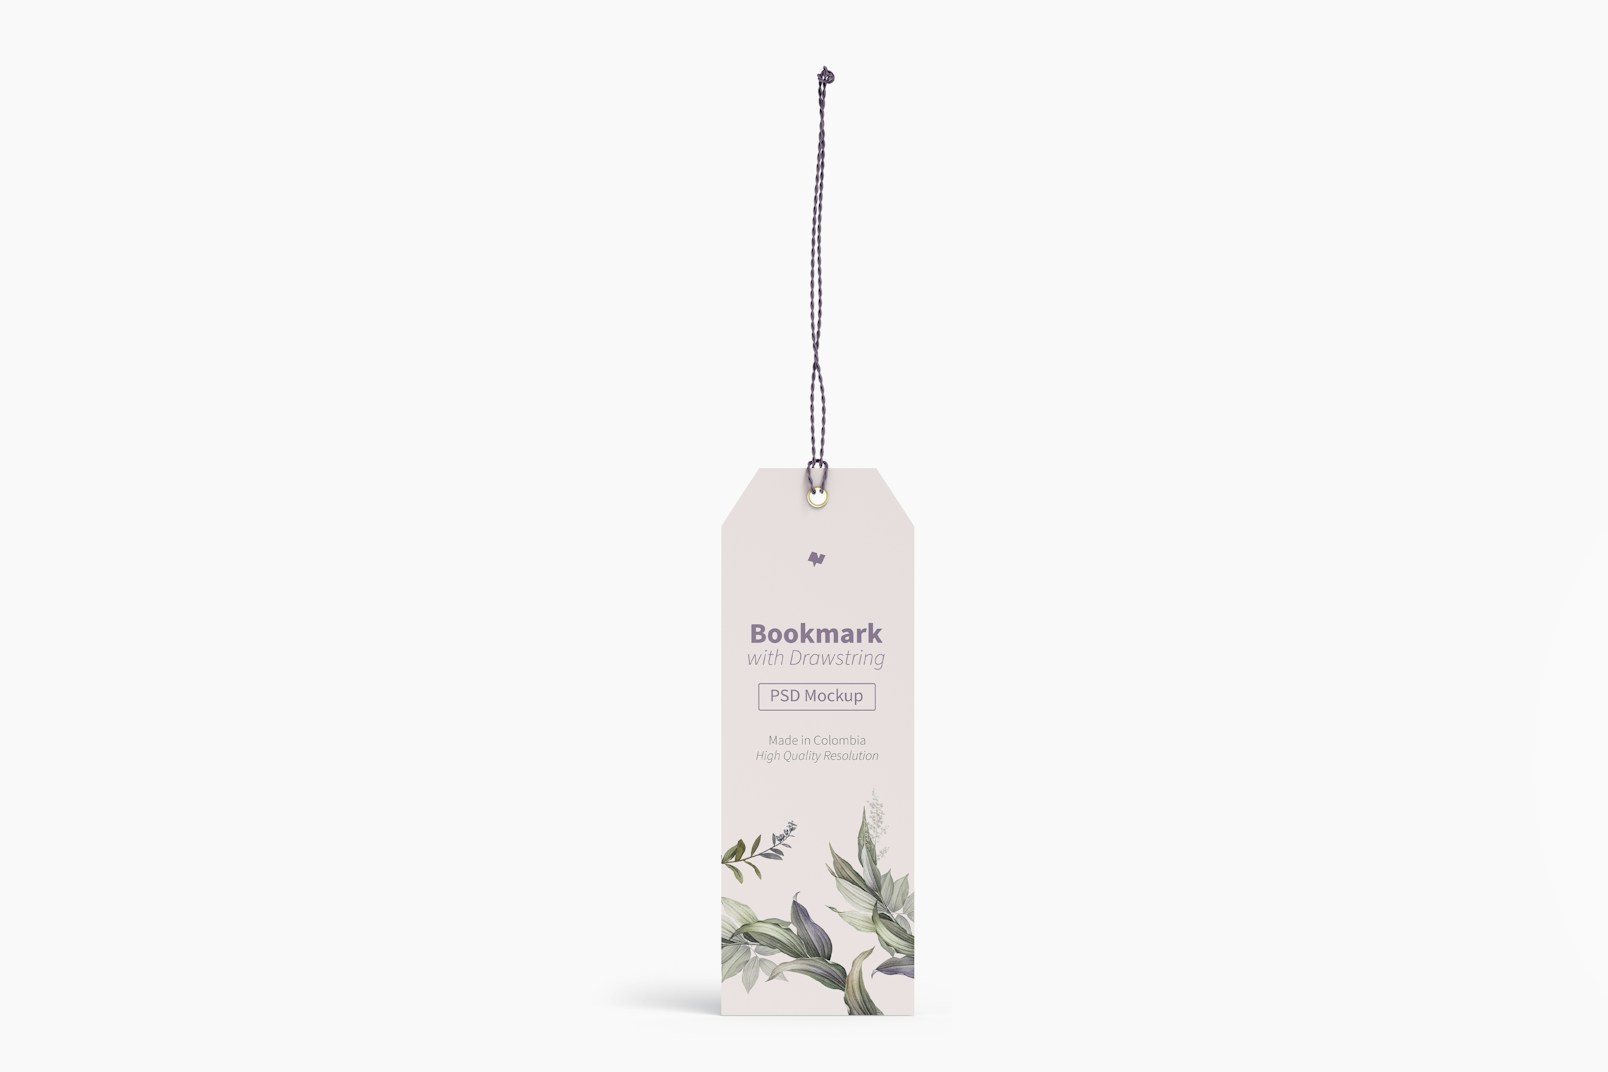 Bookmark with Drawstring Mockup, Front View